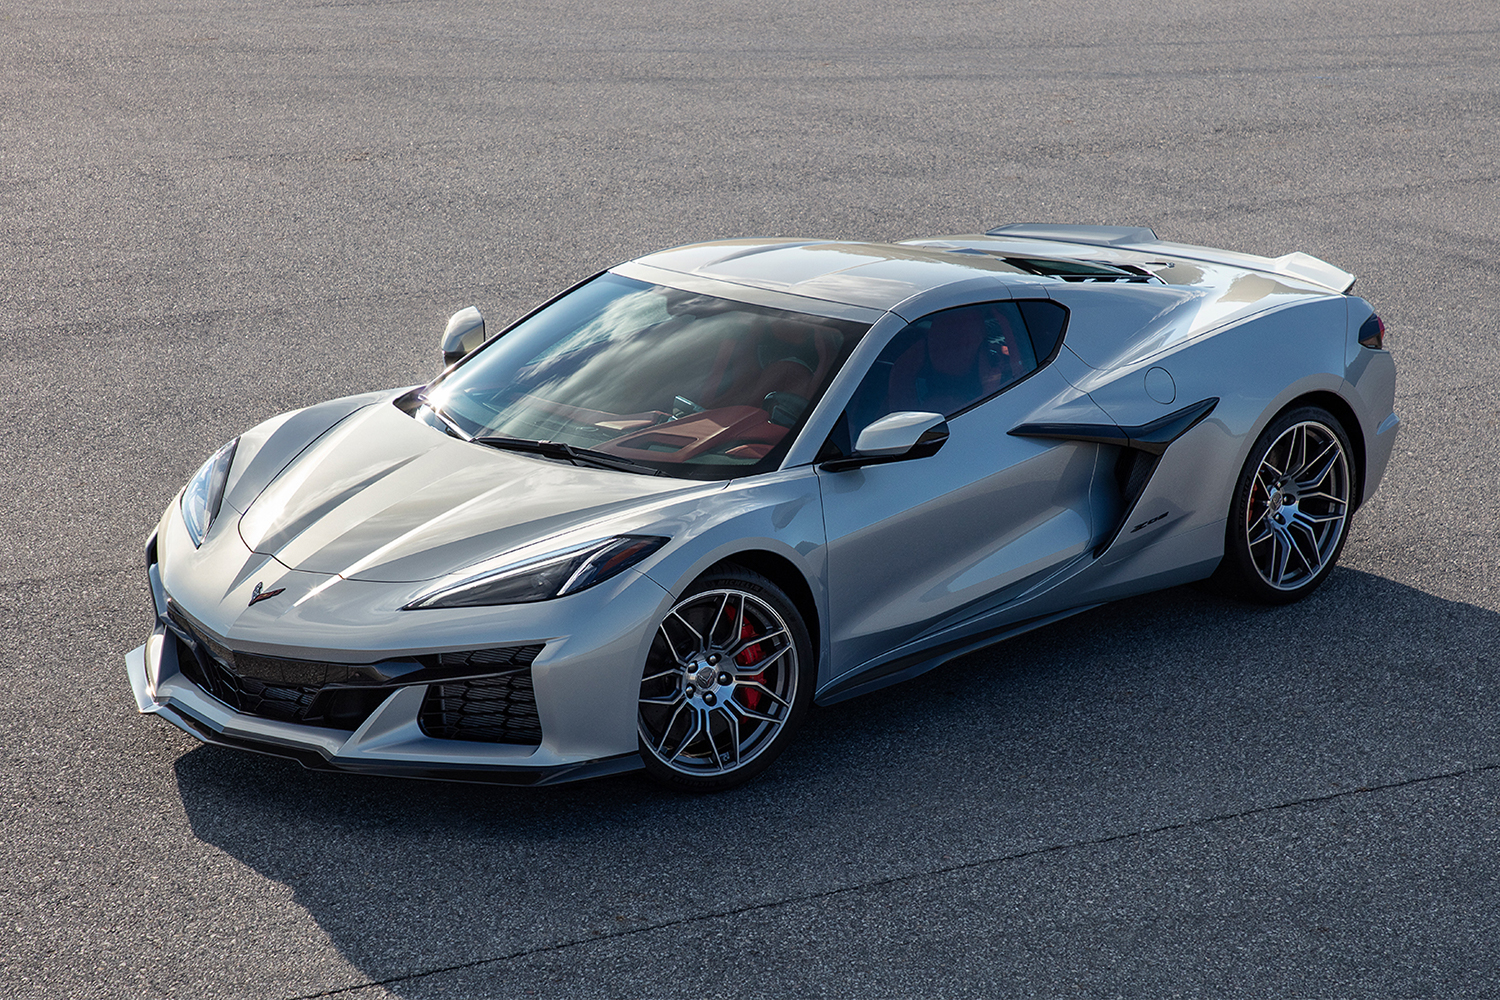 The 2023 Chevrolet Corvette Z06 in silver sitting on the tarmac. It's the first high-performance version of the new C8 Stingray.